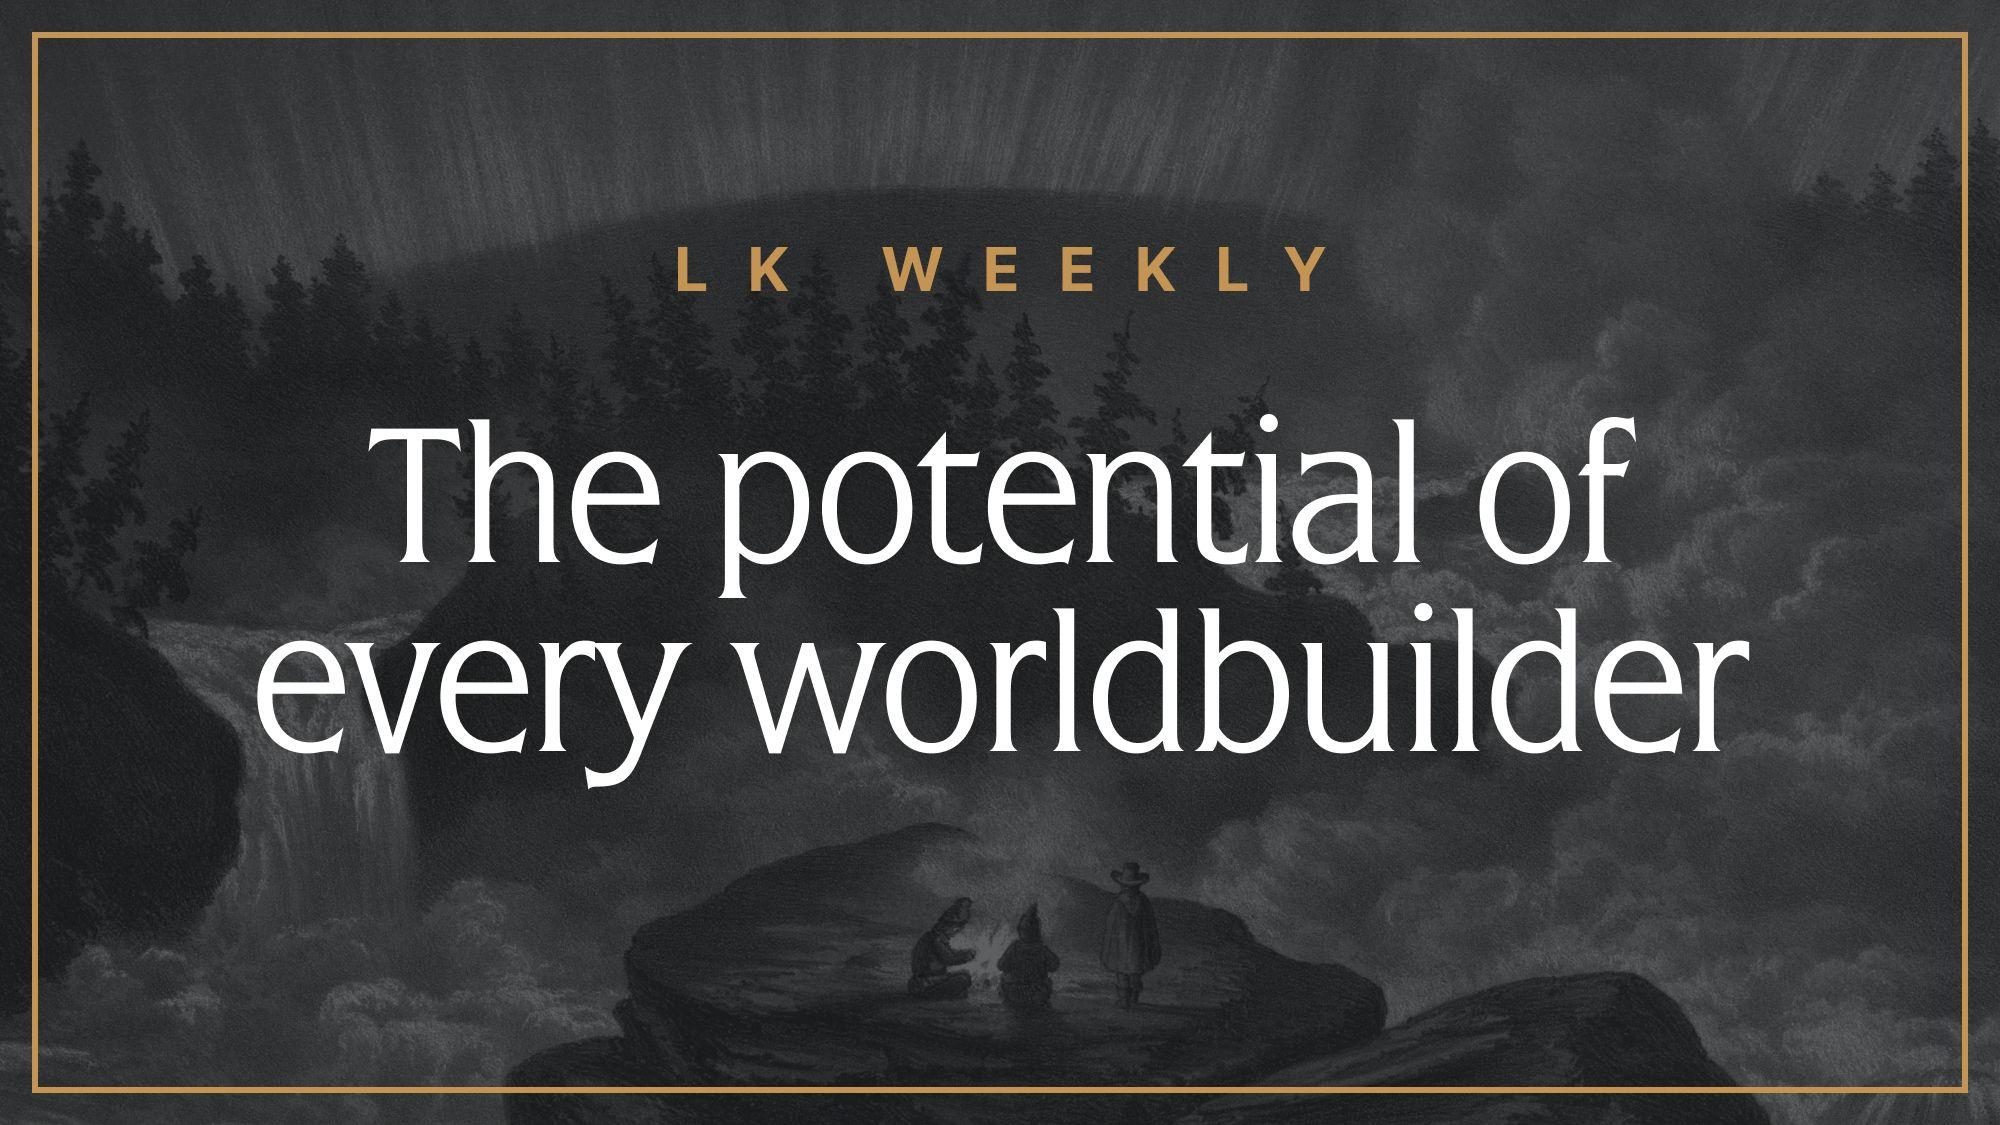 LK Weekly: Unleash the creative potential of every worldbuilder